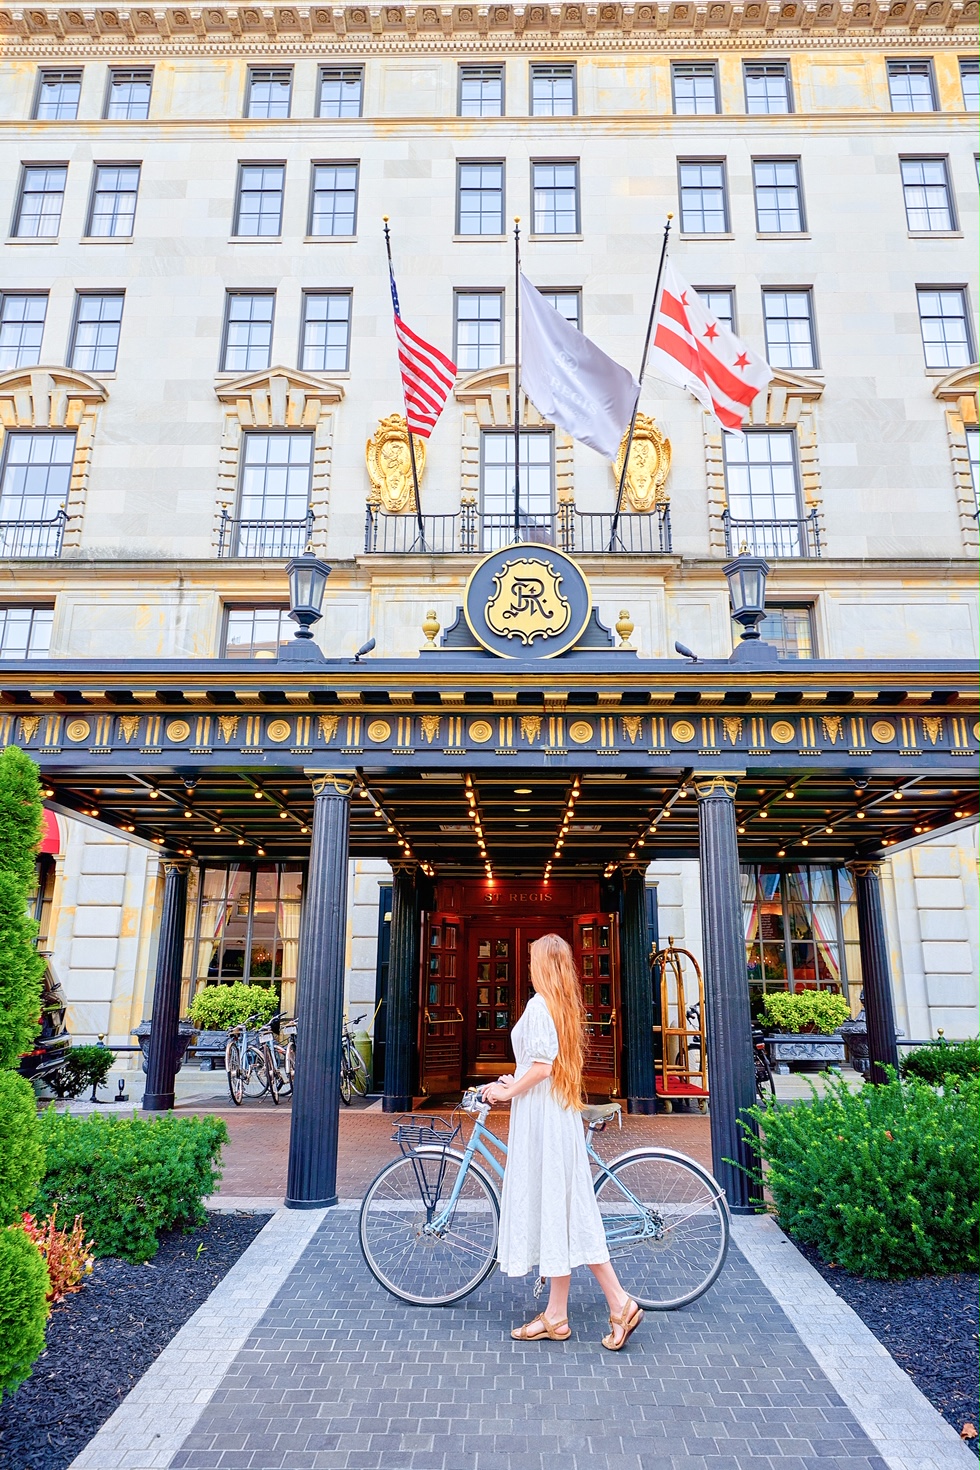 A woman in a white dress with long hair standing next to a bicycle. She is standing in front of the St. Regis Hotel in Washington DC. It is a ornately decorated and large hotel made of sandstone.